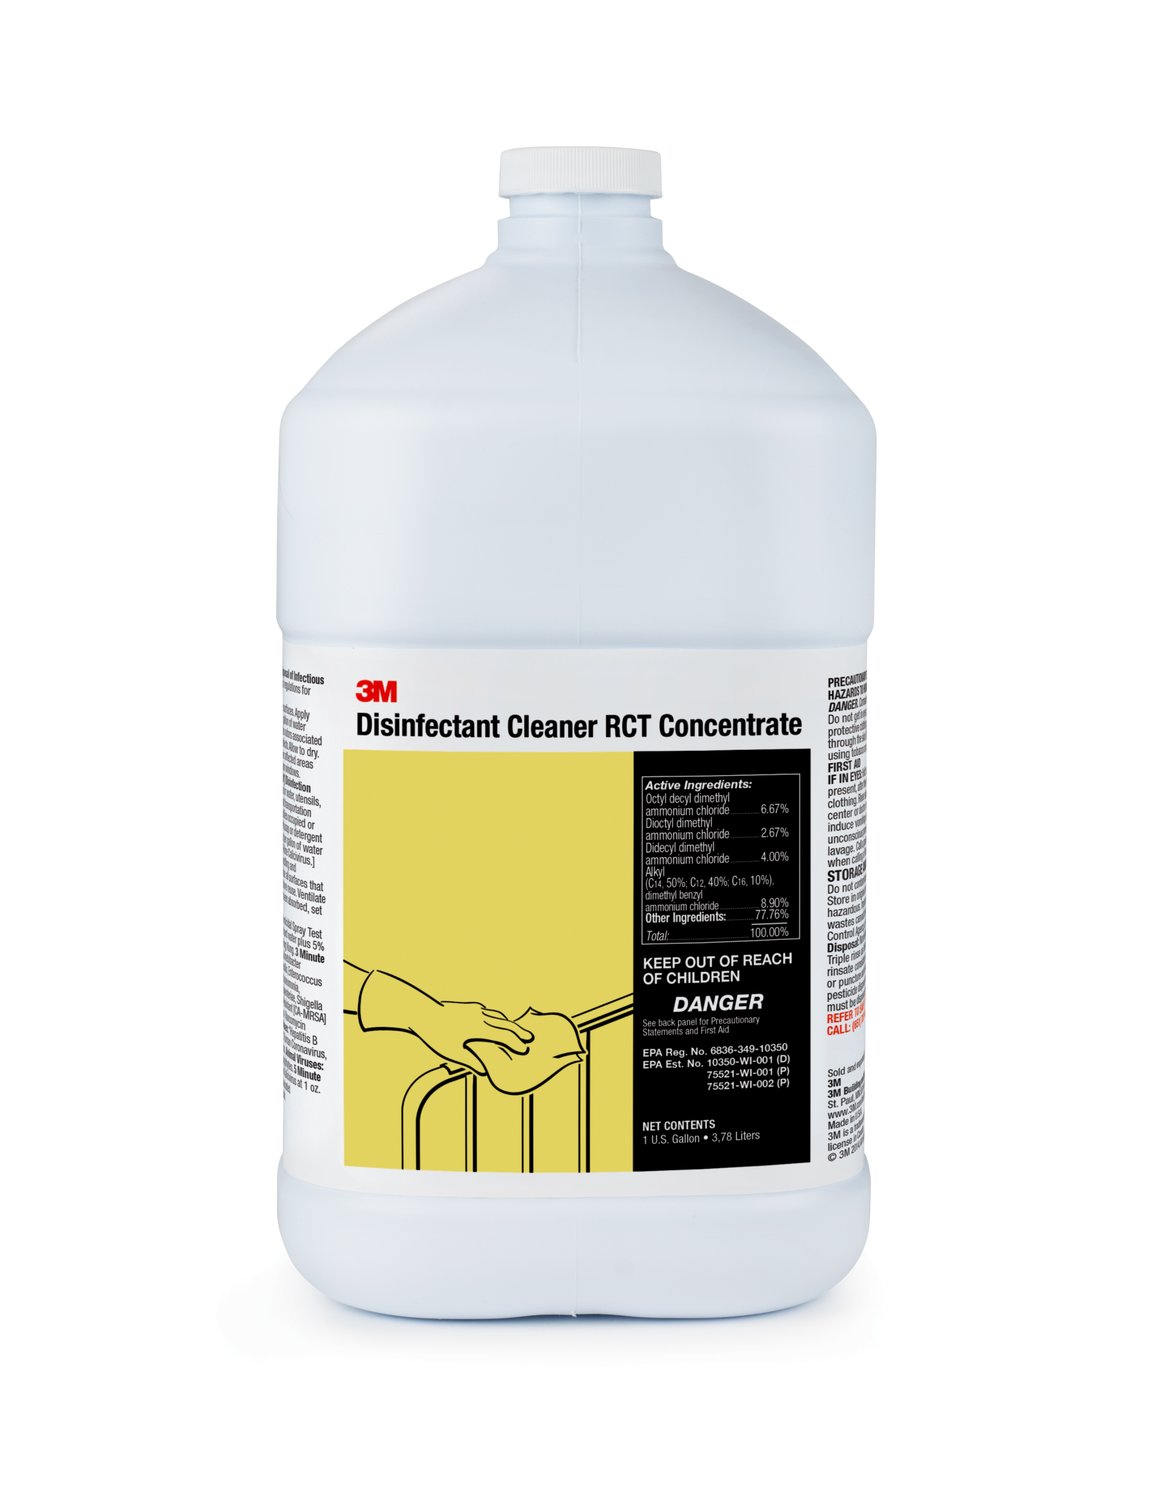 7010385951 - 3M Disinfectant Cleaner RCT Concentrate, 1 Gallon, 4/Case